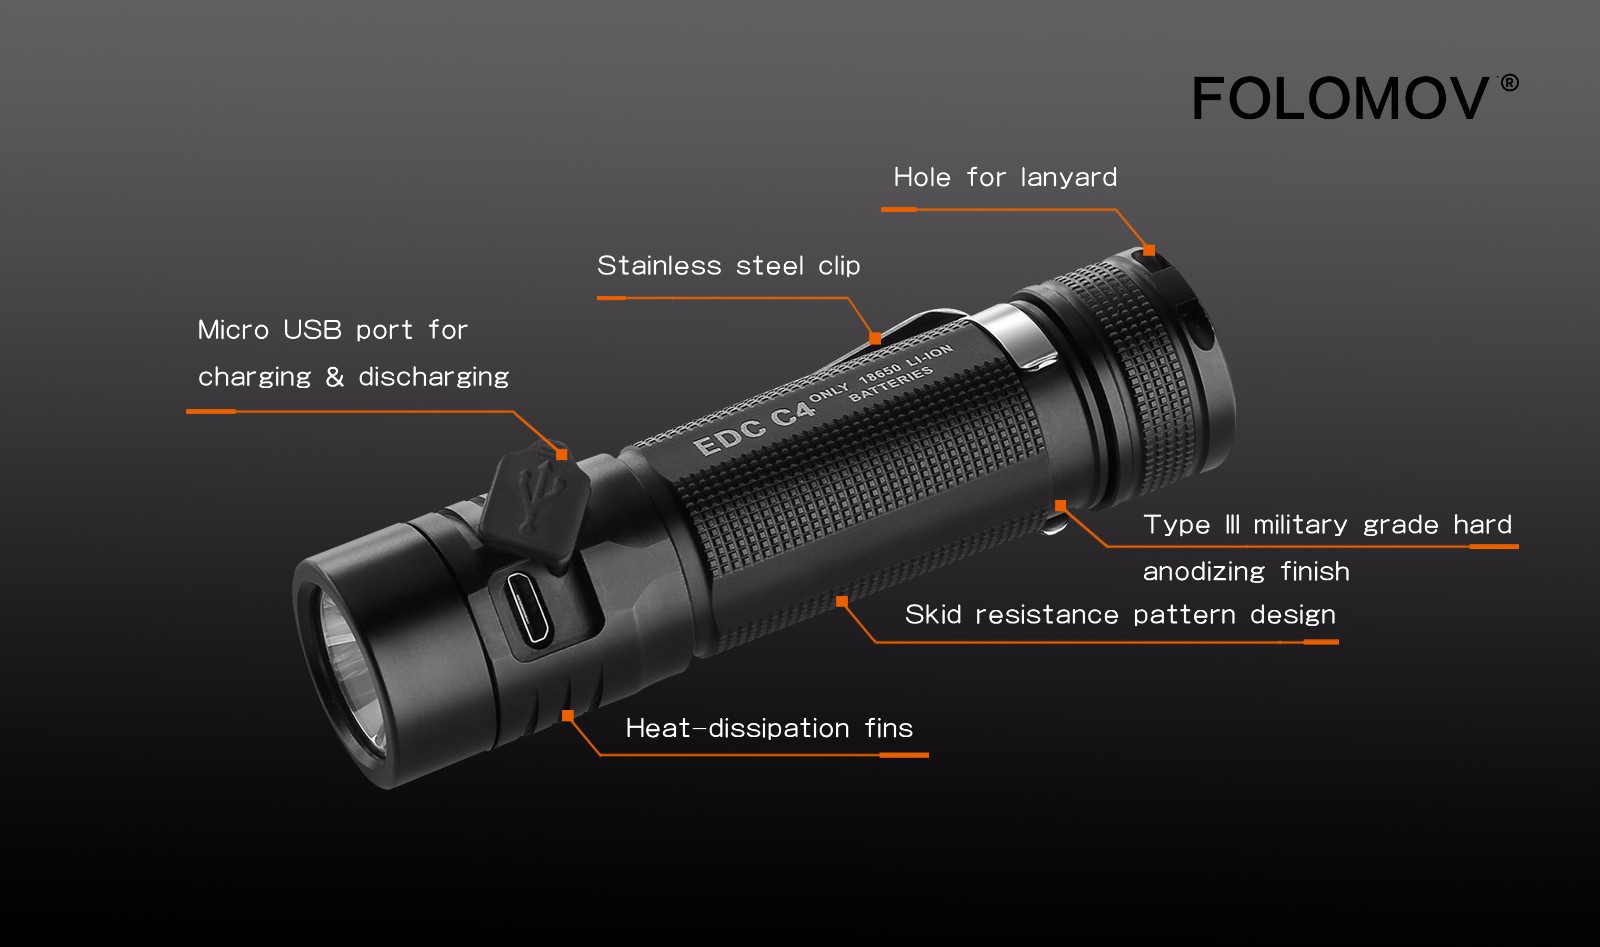 Folomov EDC-C4 1200LM High Lumen Compact EDC Flashlight with 18650 Battery USB Rechargeable Memory Function Mini LED Torch